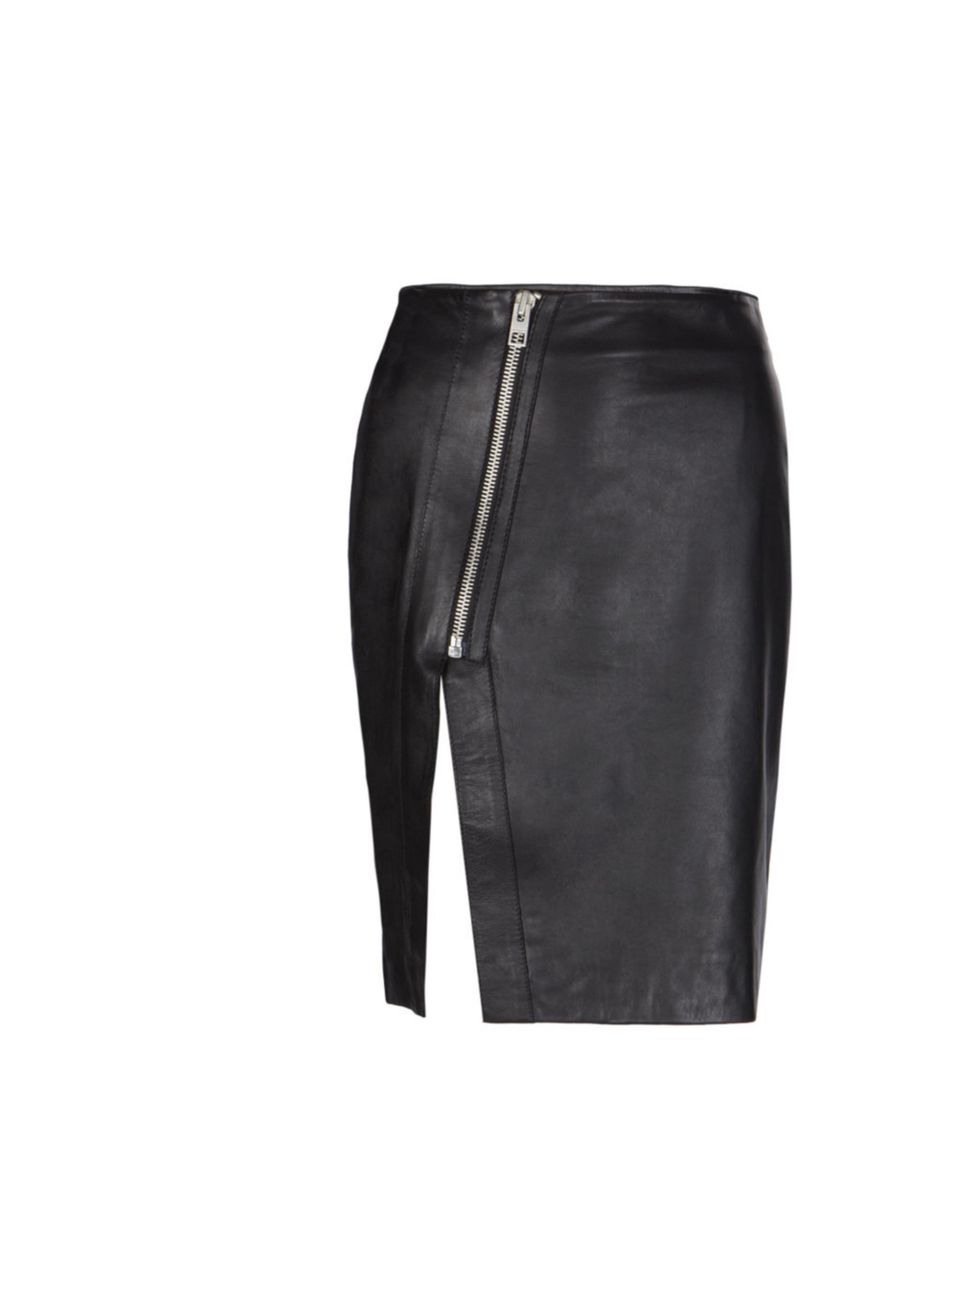 <p>AllSaints is the stand-out go-to for leather on the high street. And with their new spring drop landing in stores throughout the month, youll find even more leather delights to tempt <a href="http://www.allsaints.com/women/leather/">AllSaints</a> spl